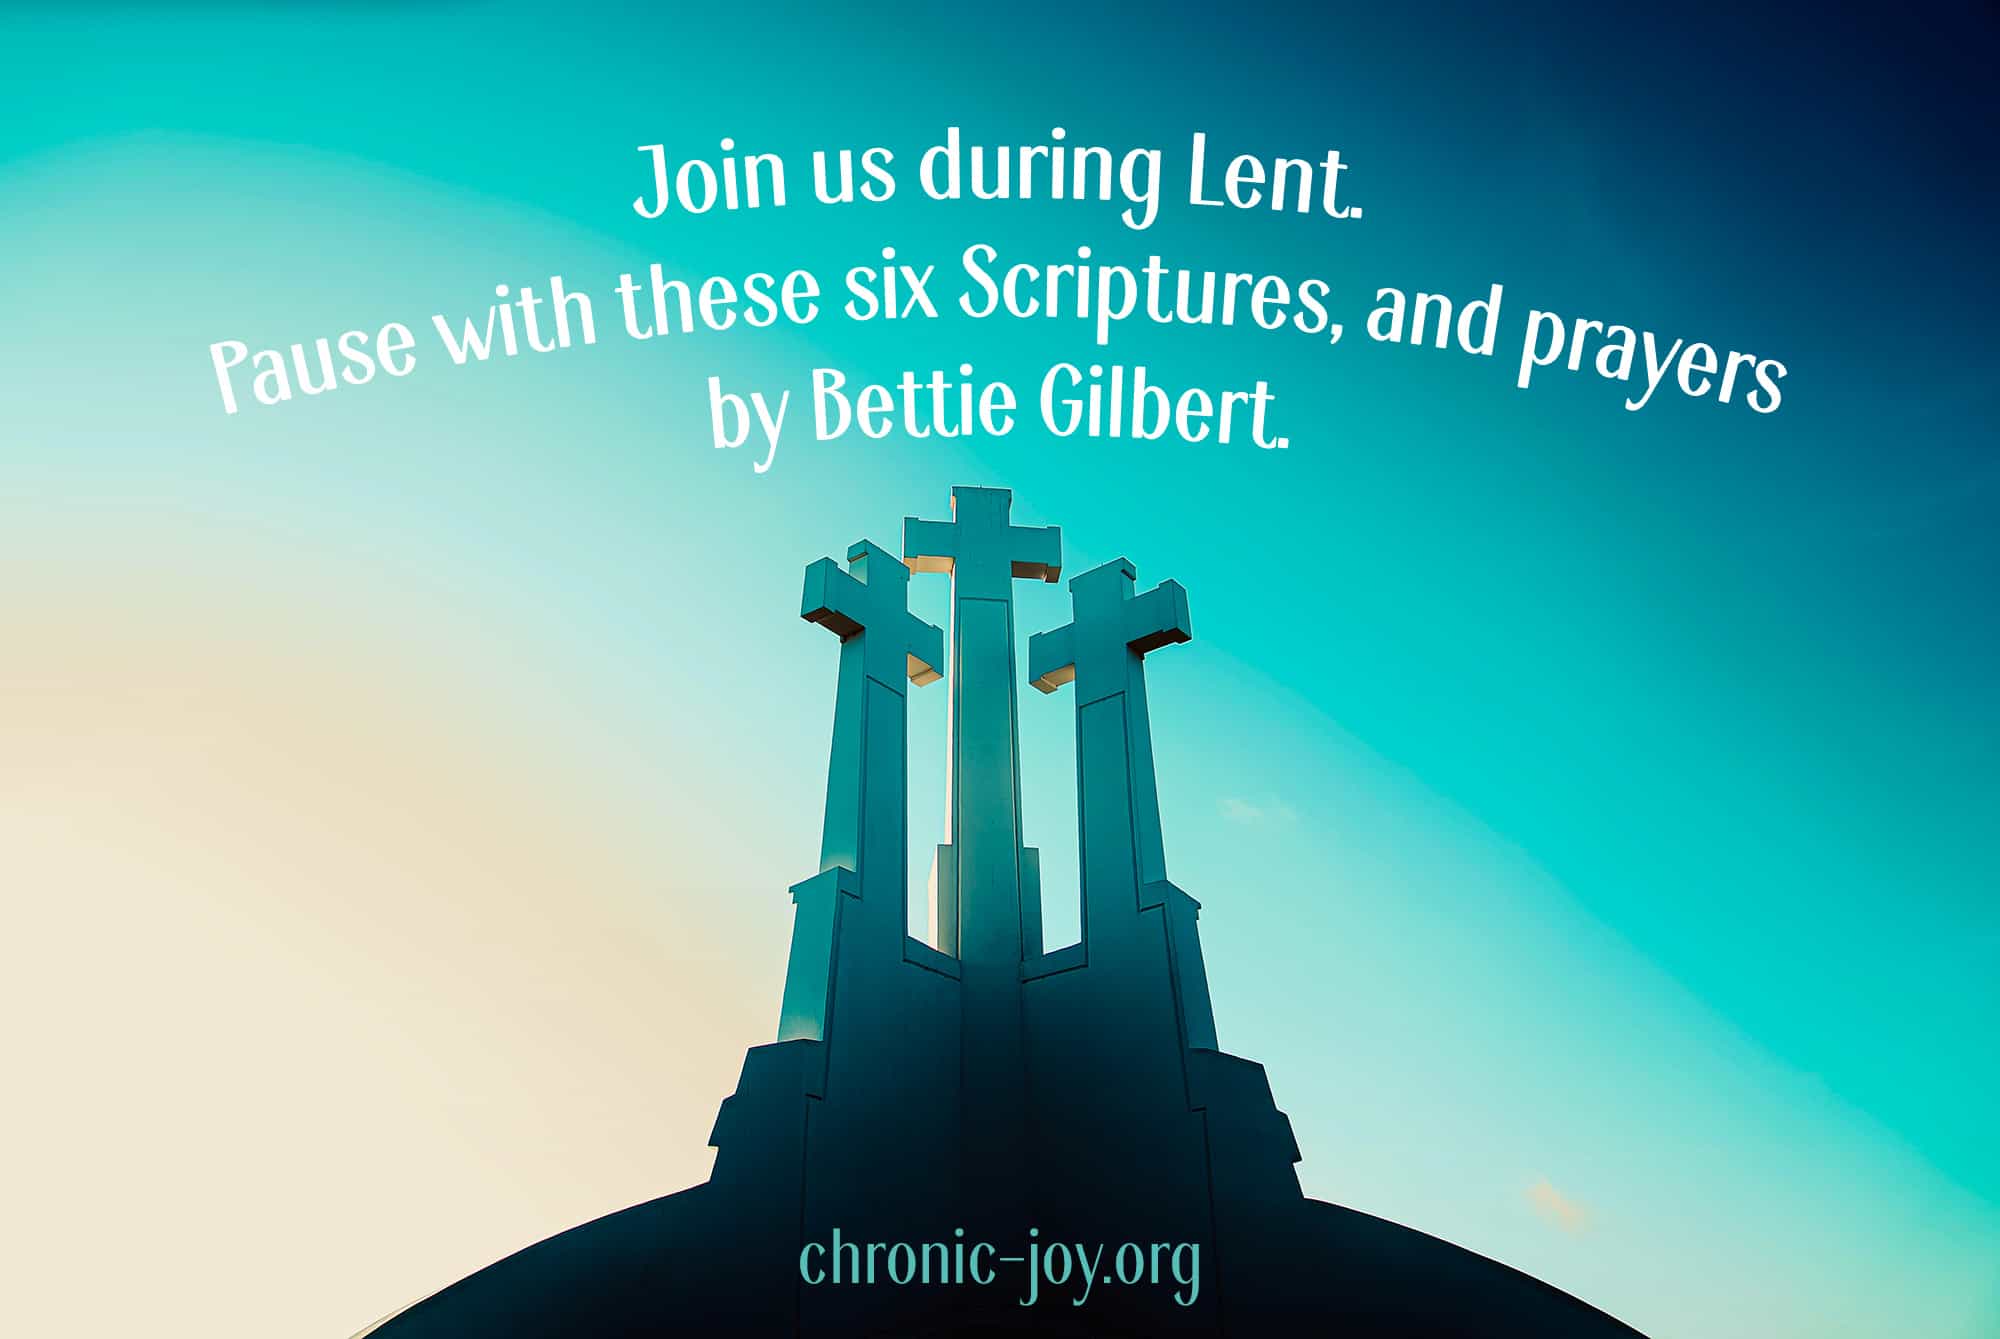 Join us during Lent. Pause with these six Scriptures, and prayers by Bettie Gilbert.